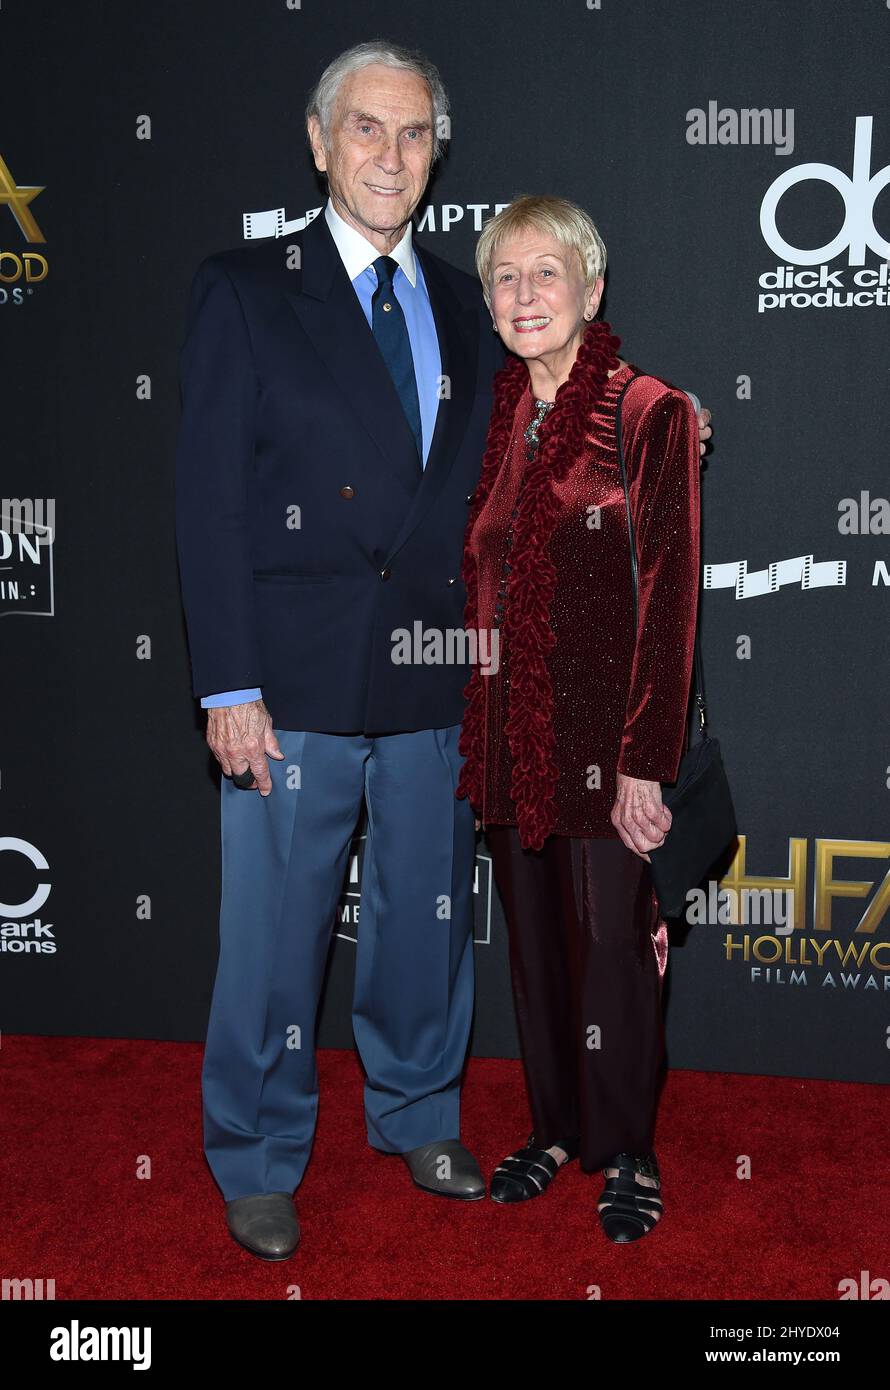 Peter Mark Richman attending the 21st Annual Hollywood Film Awards held at the Beverly Hilton Hotel Stock Photo